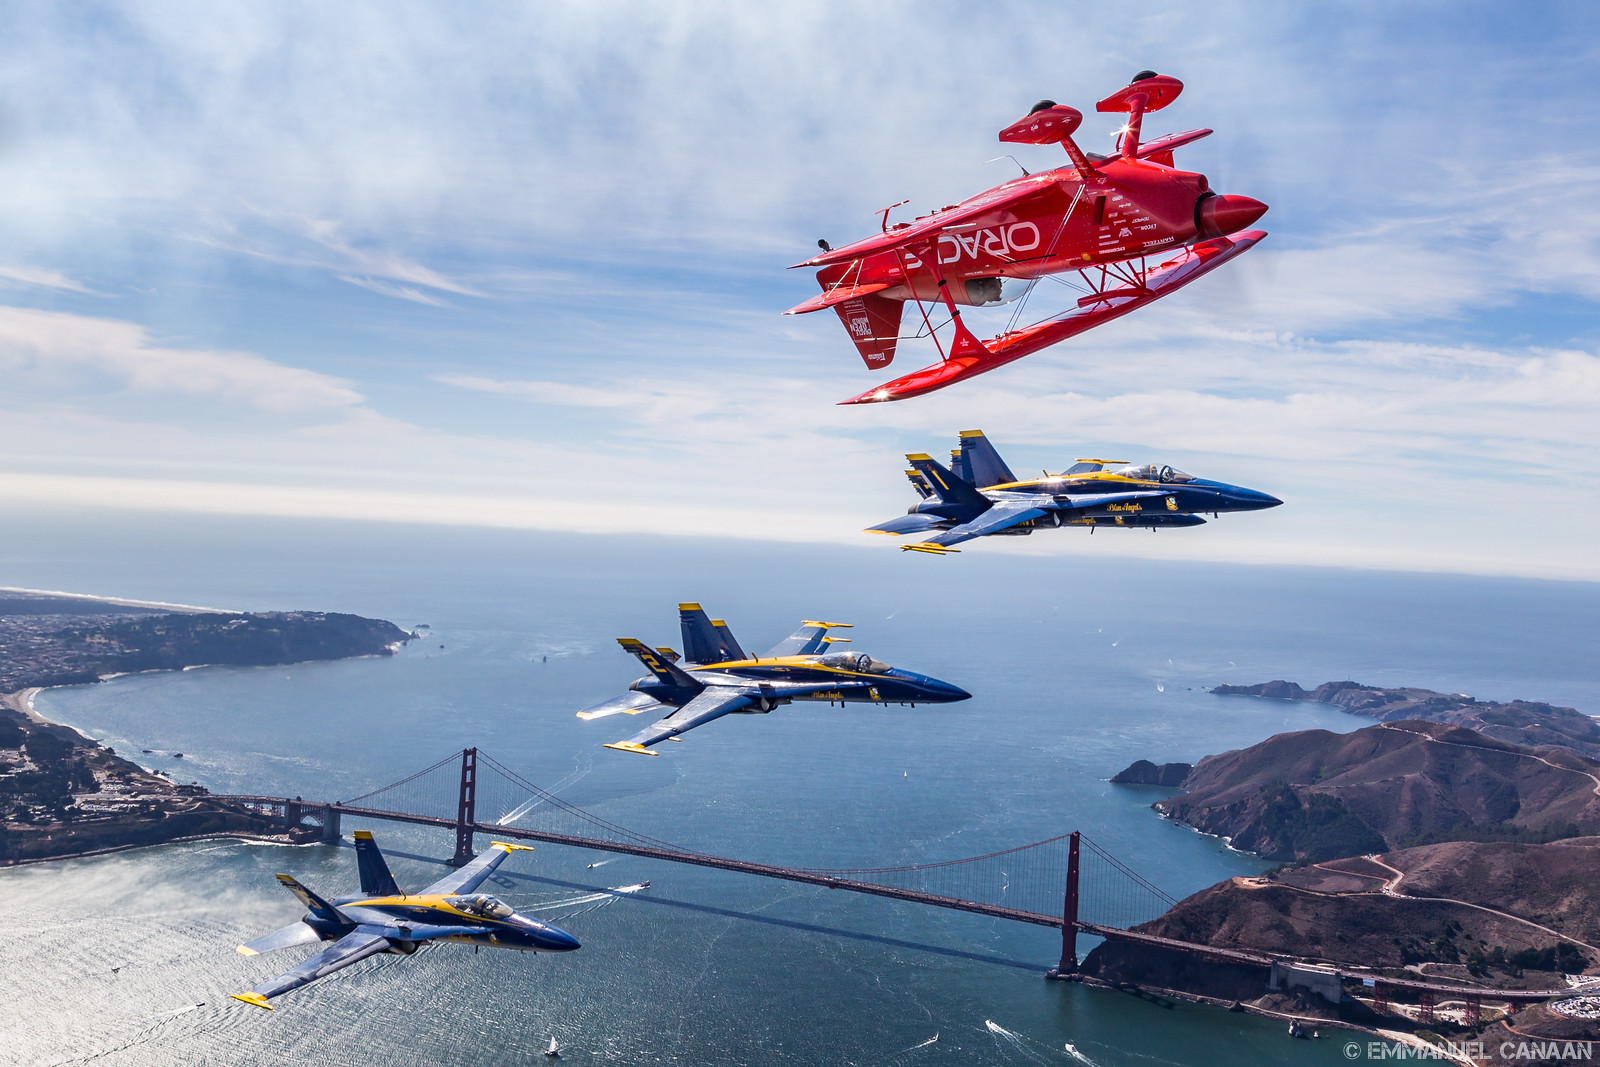 As if passing over the Golden Gate Bridge in formation was not enough, Sean D. Tucker repeats the maneuver, only this time in an inverted attitude! (photo bay Emmanuel Canaan)